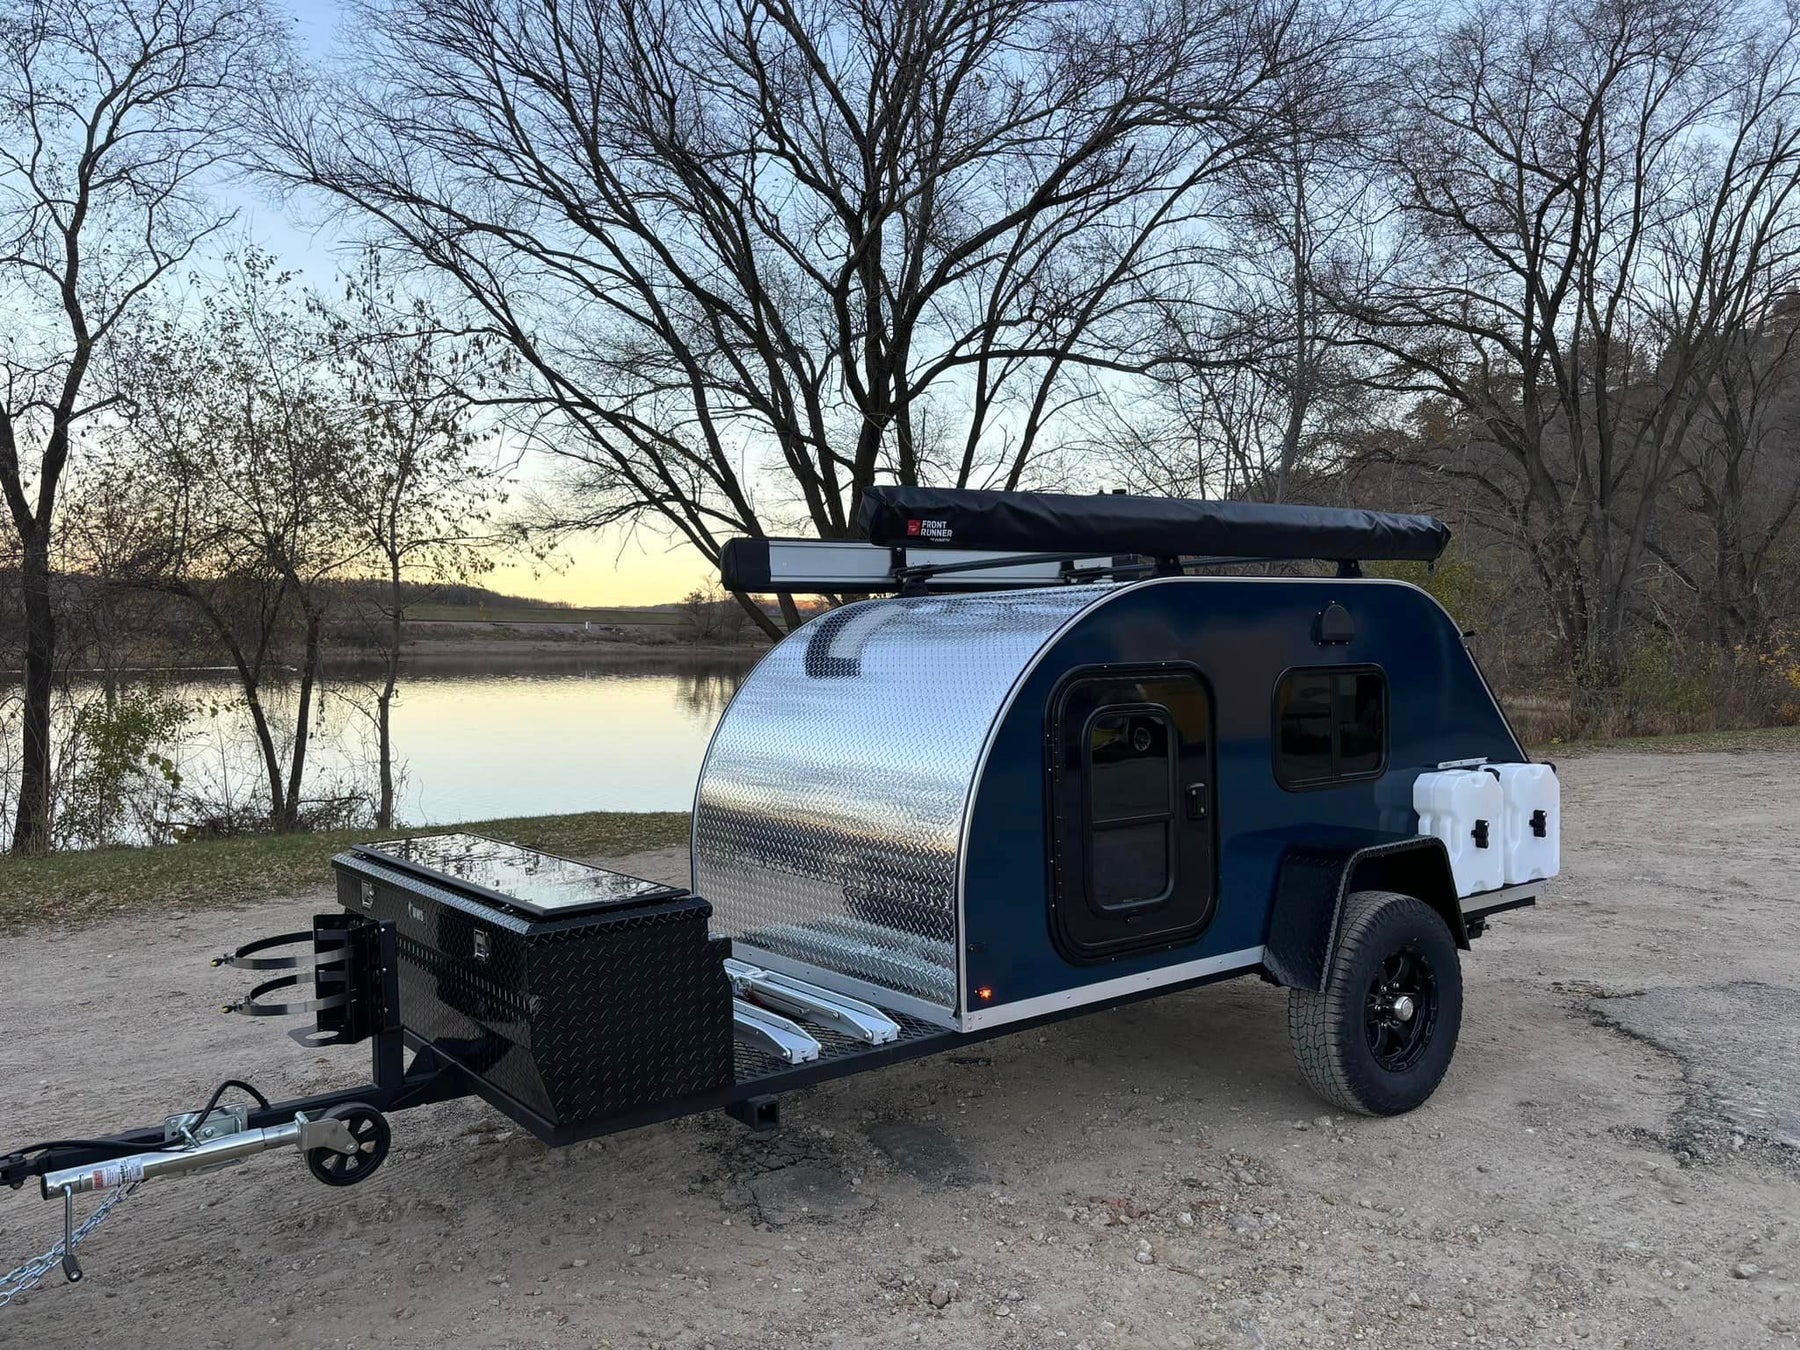 Featured Article: "Gear Showcase: Overland Trailers" from overlandexpo.com